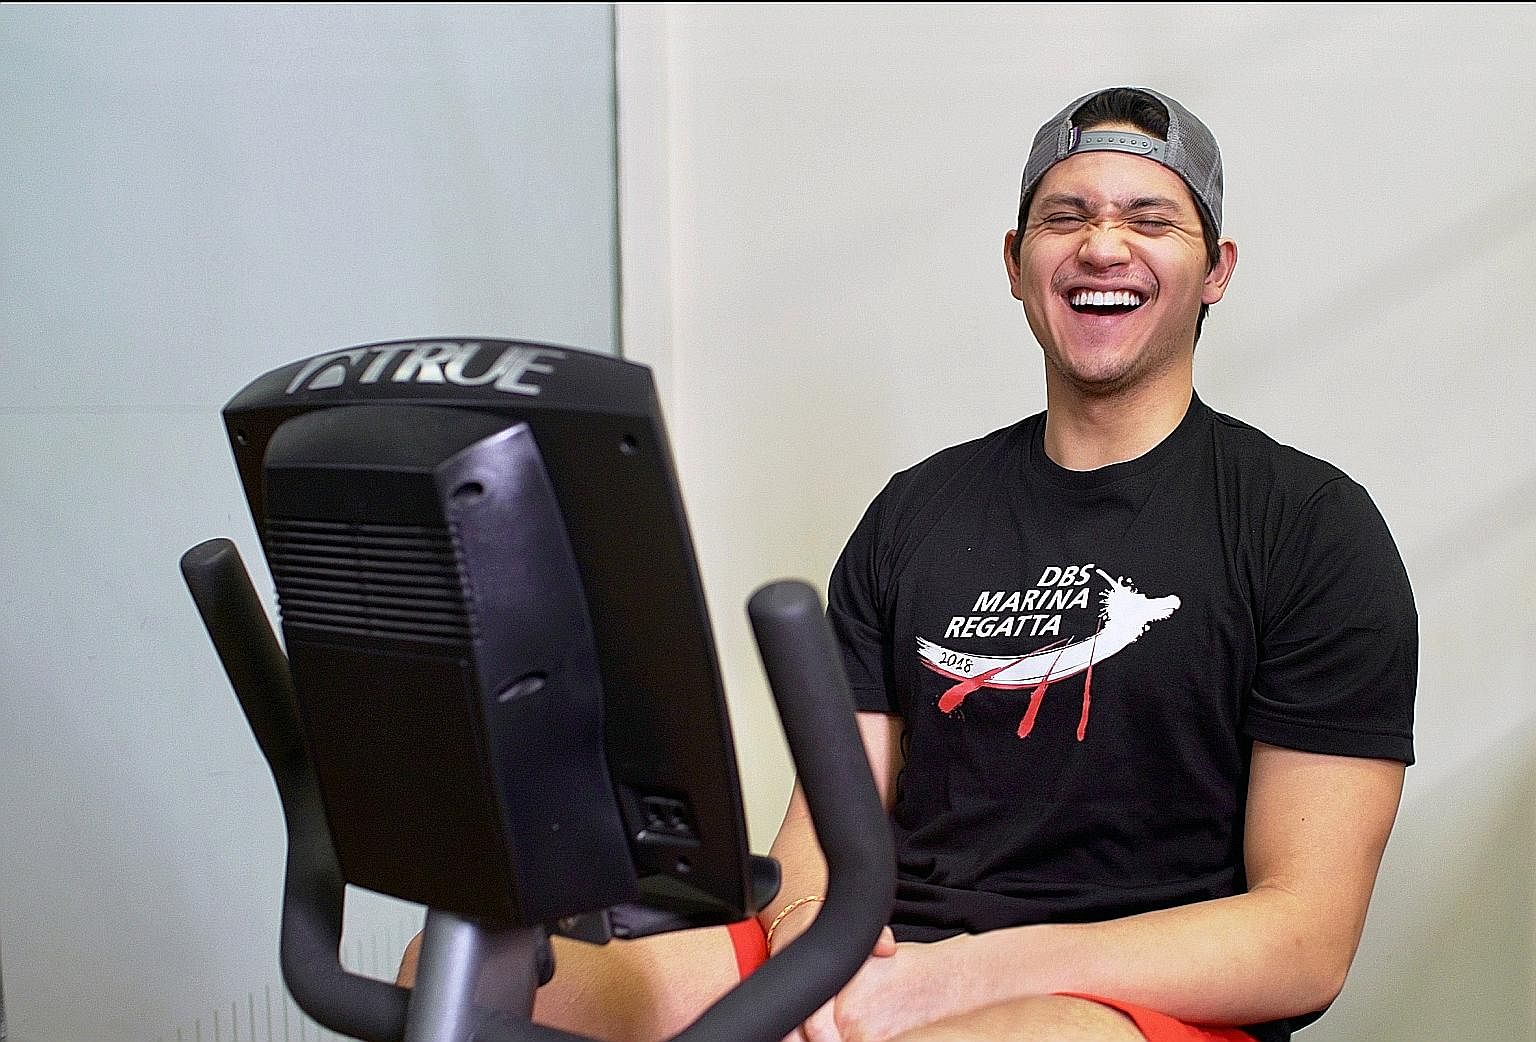 Olympic gold medallist Joseph Schooling's DBS deal will see him work with the bank to inspire young people through community activities and social media engagements. A career in wealth management at DBS could also be on the cards for the University o